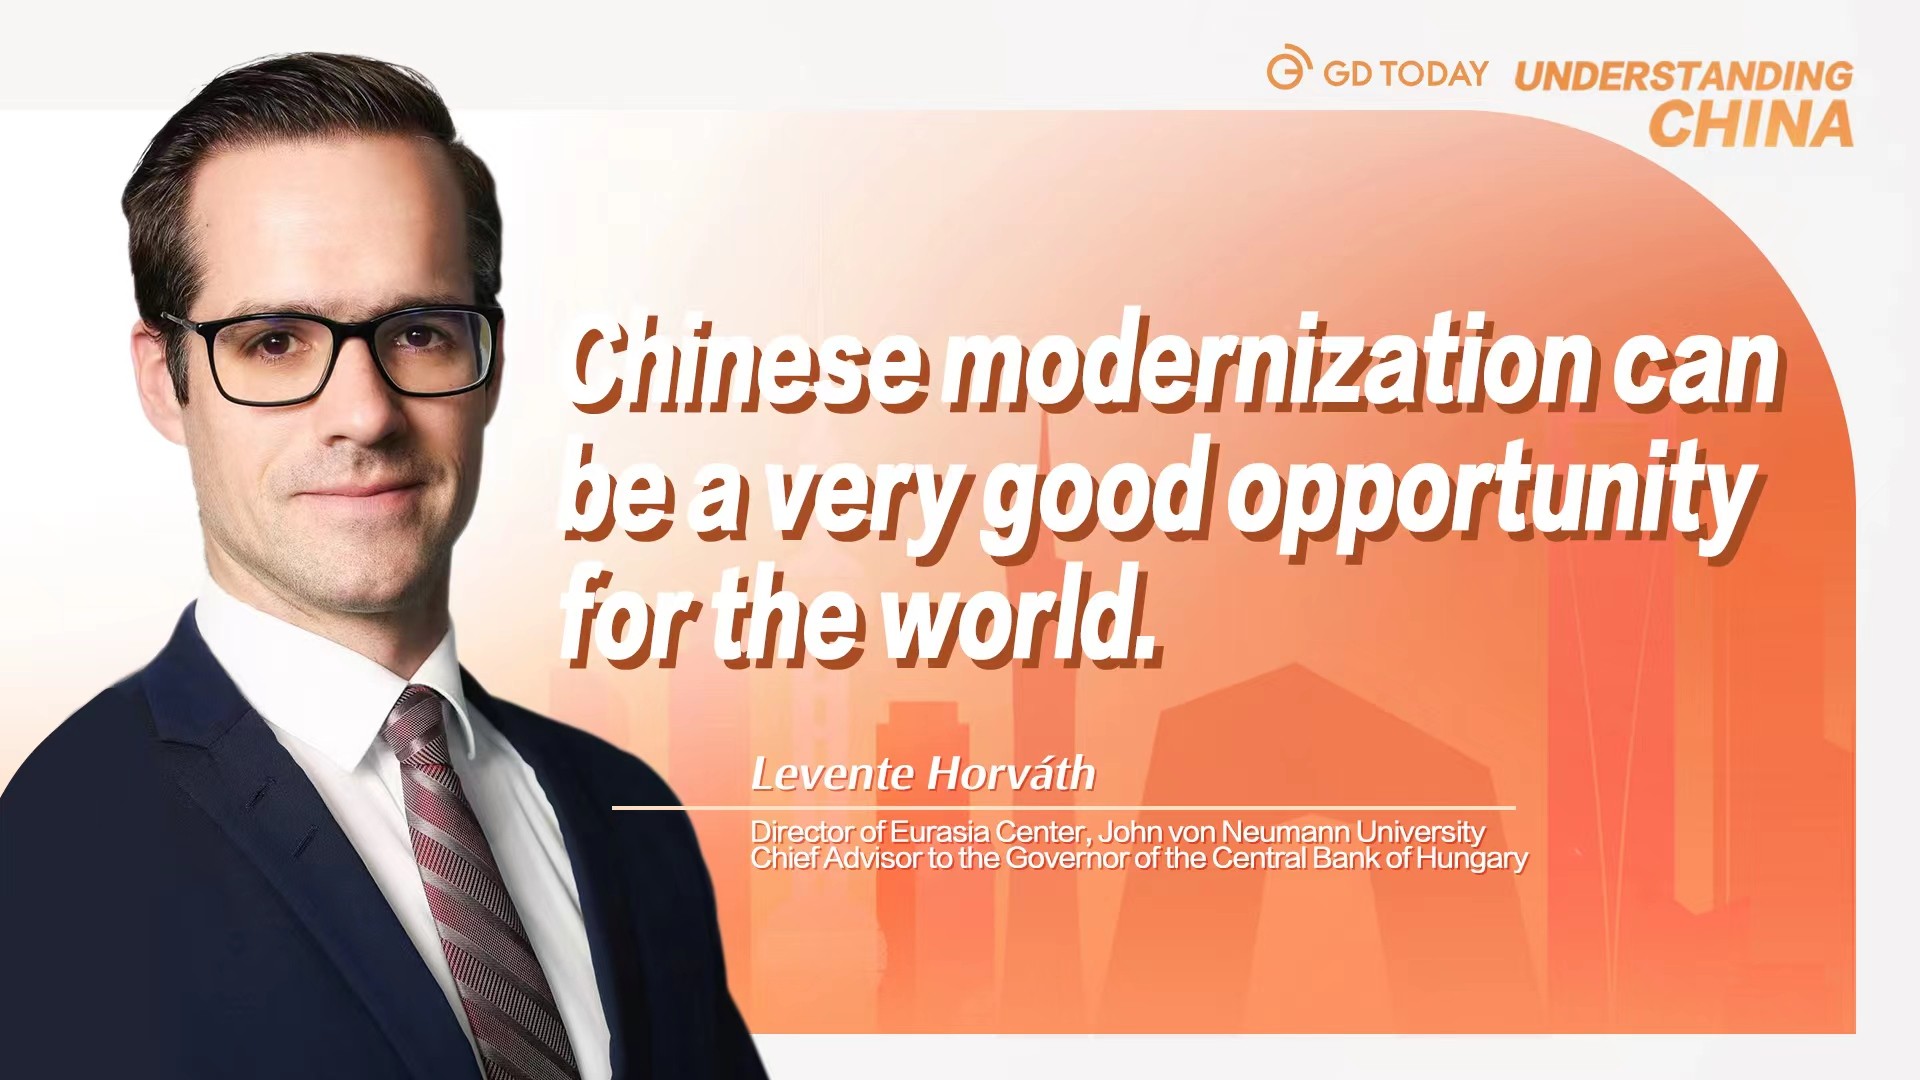 Levente Horváth: Chinese modernization can be good model for world